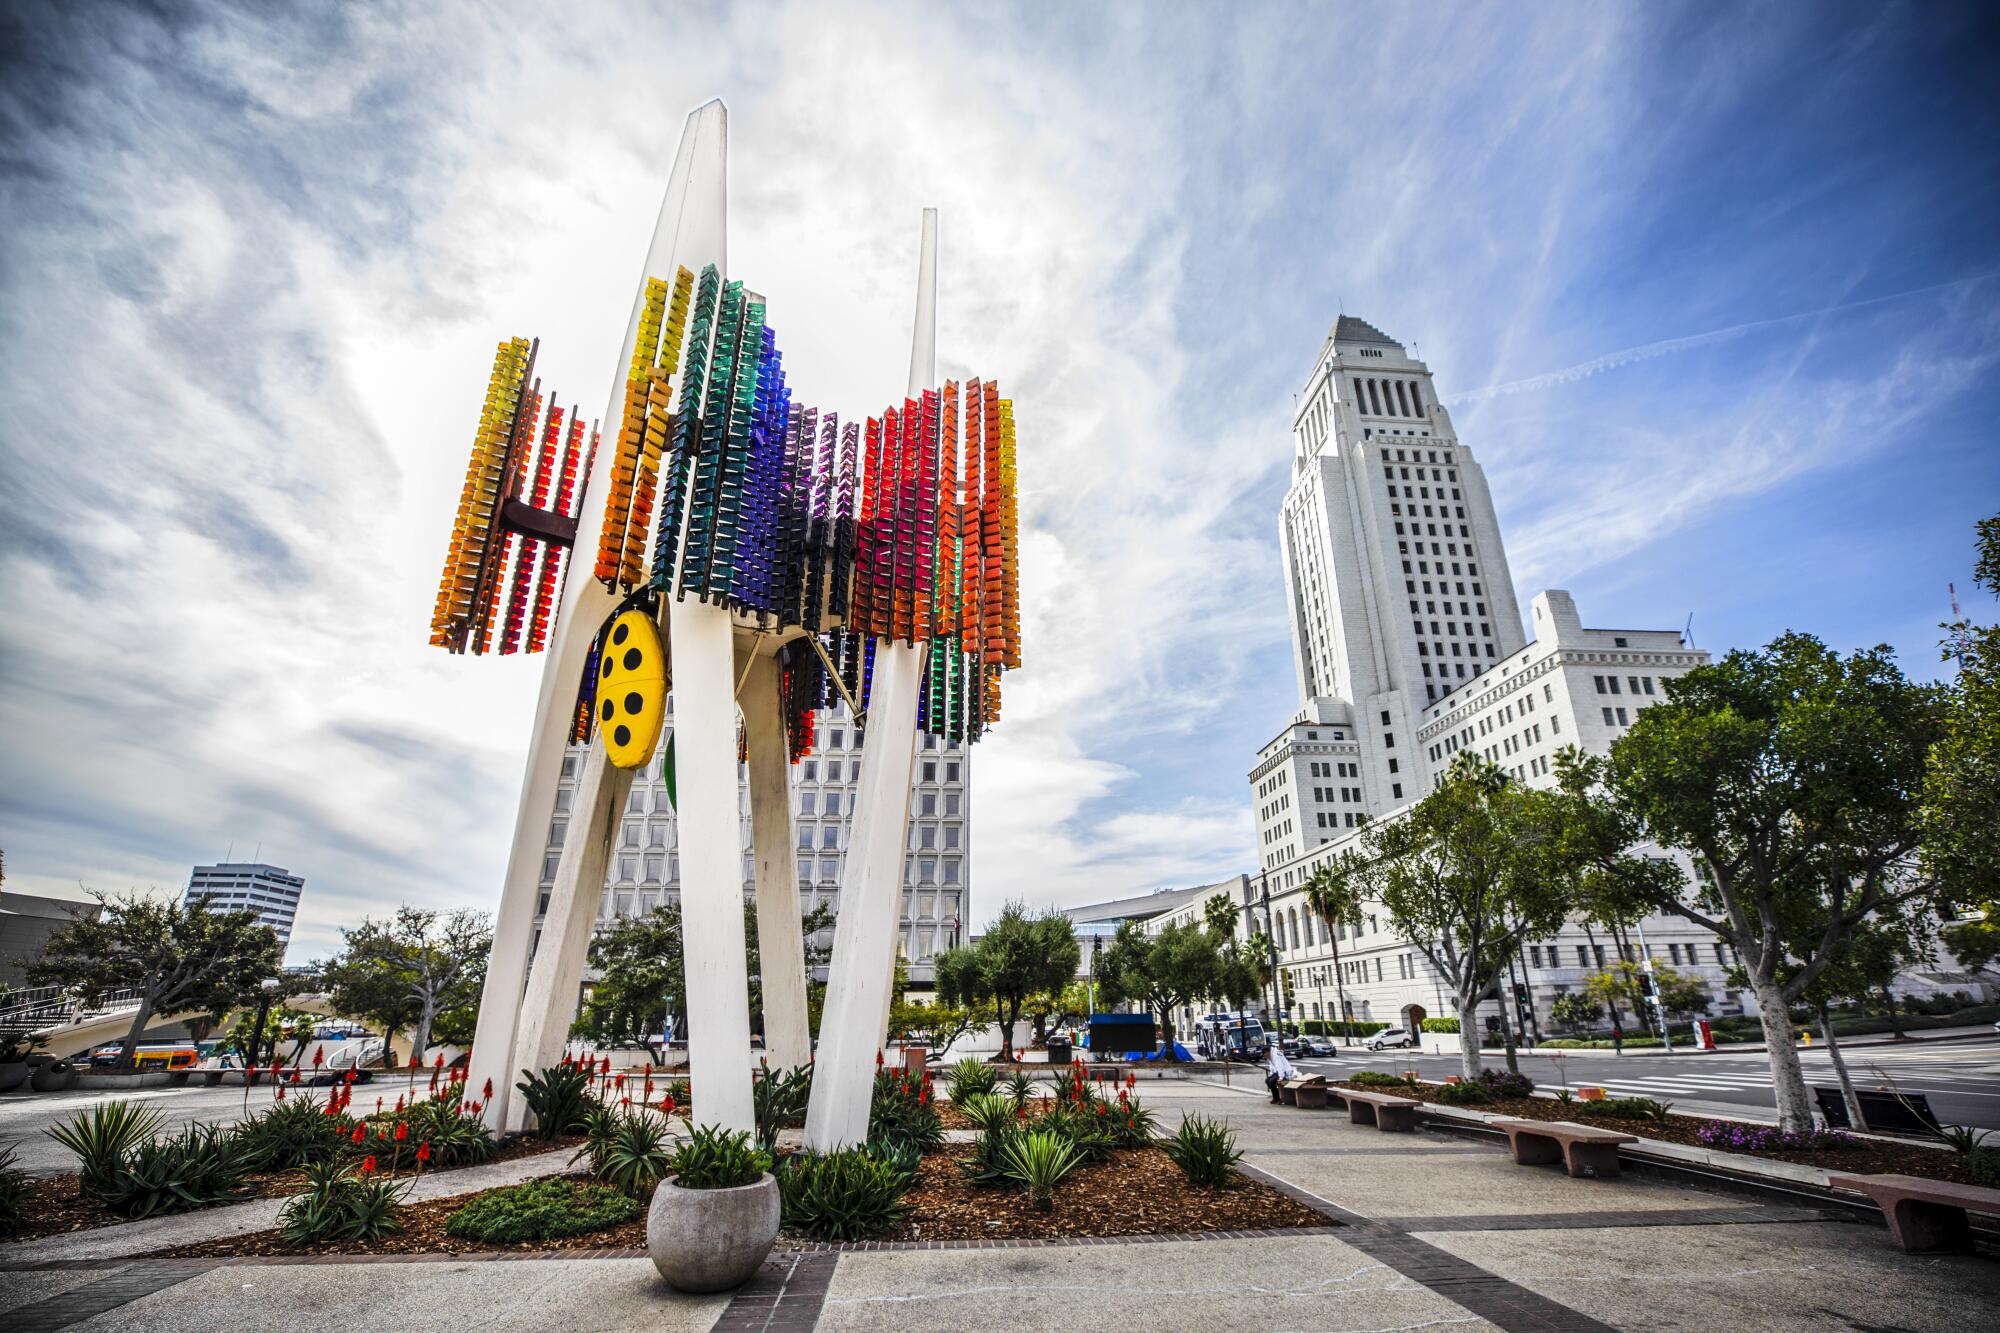 The Triforium was installed in 1975 in the shadow of City Hall.